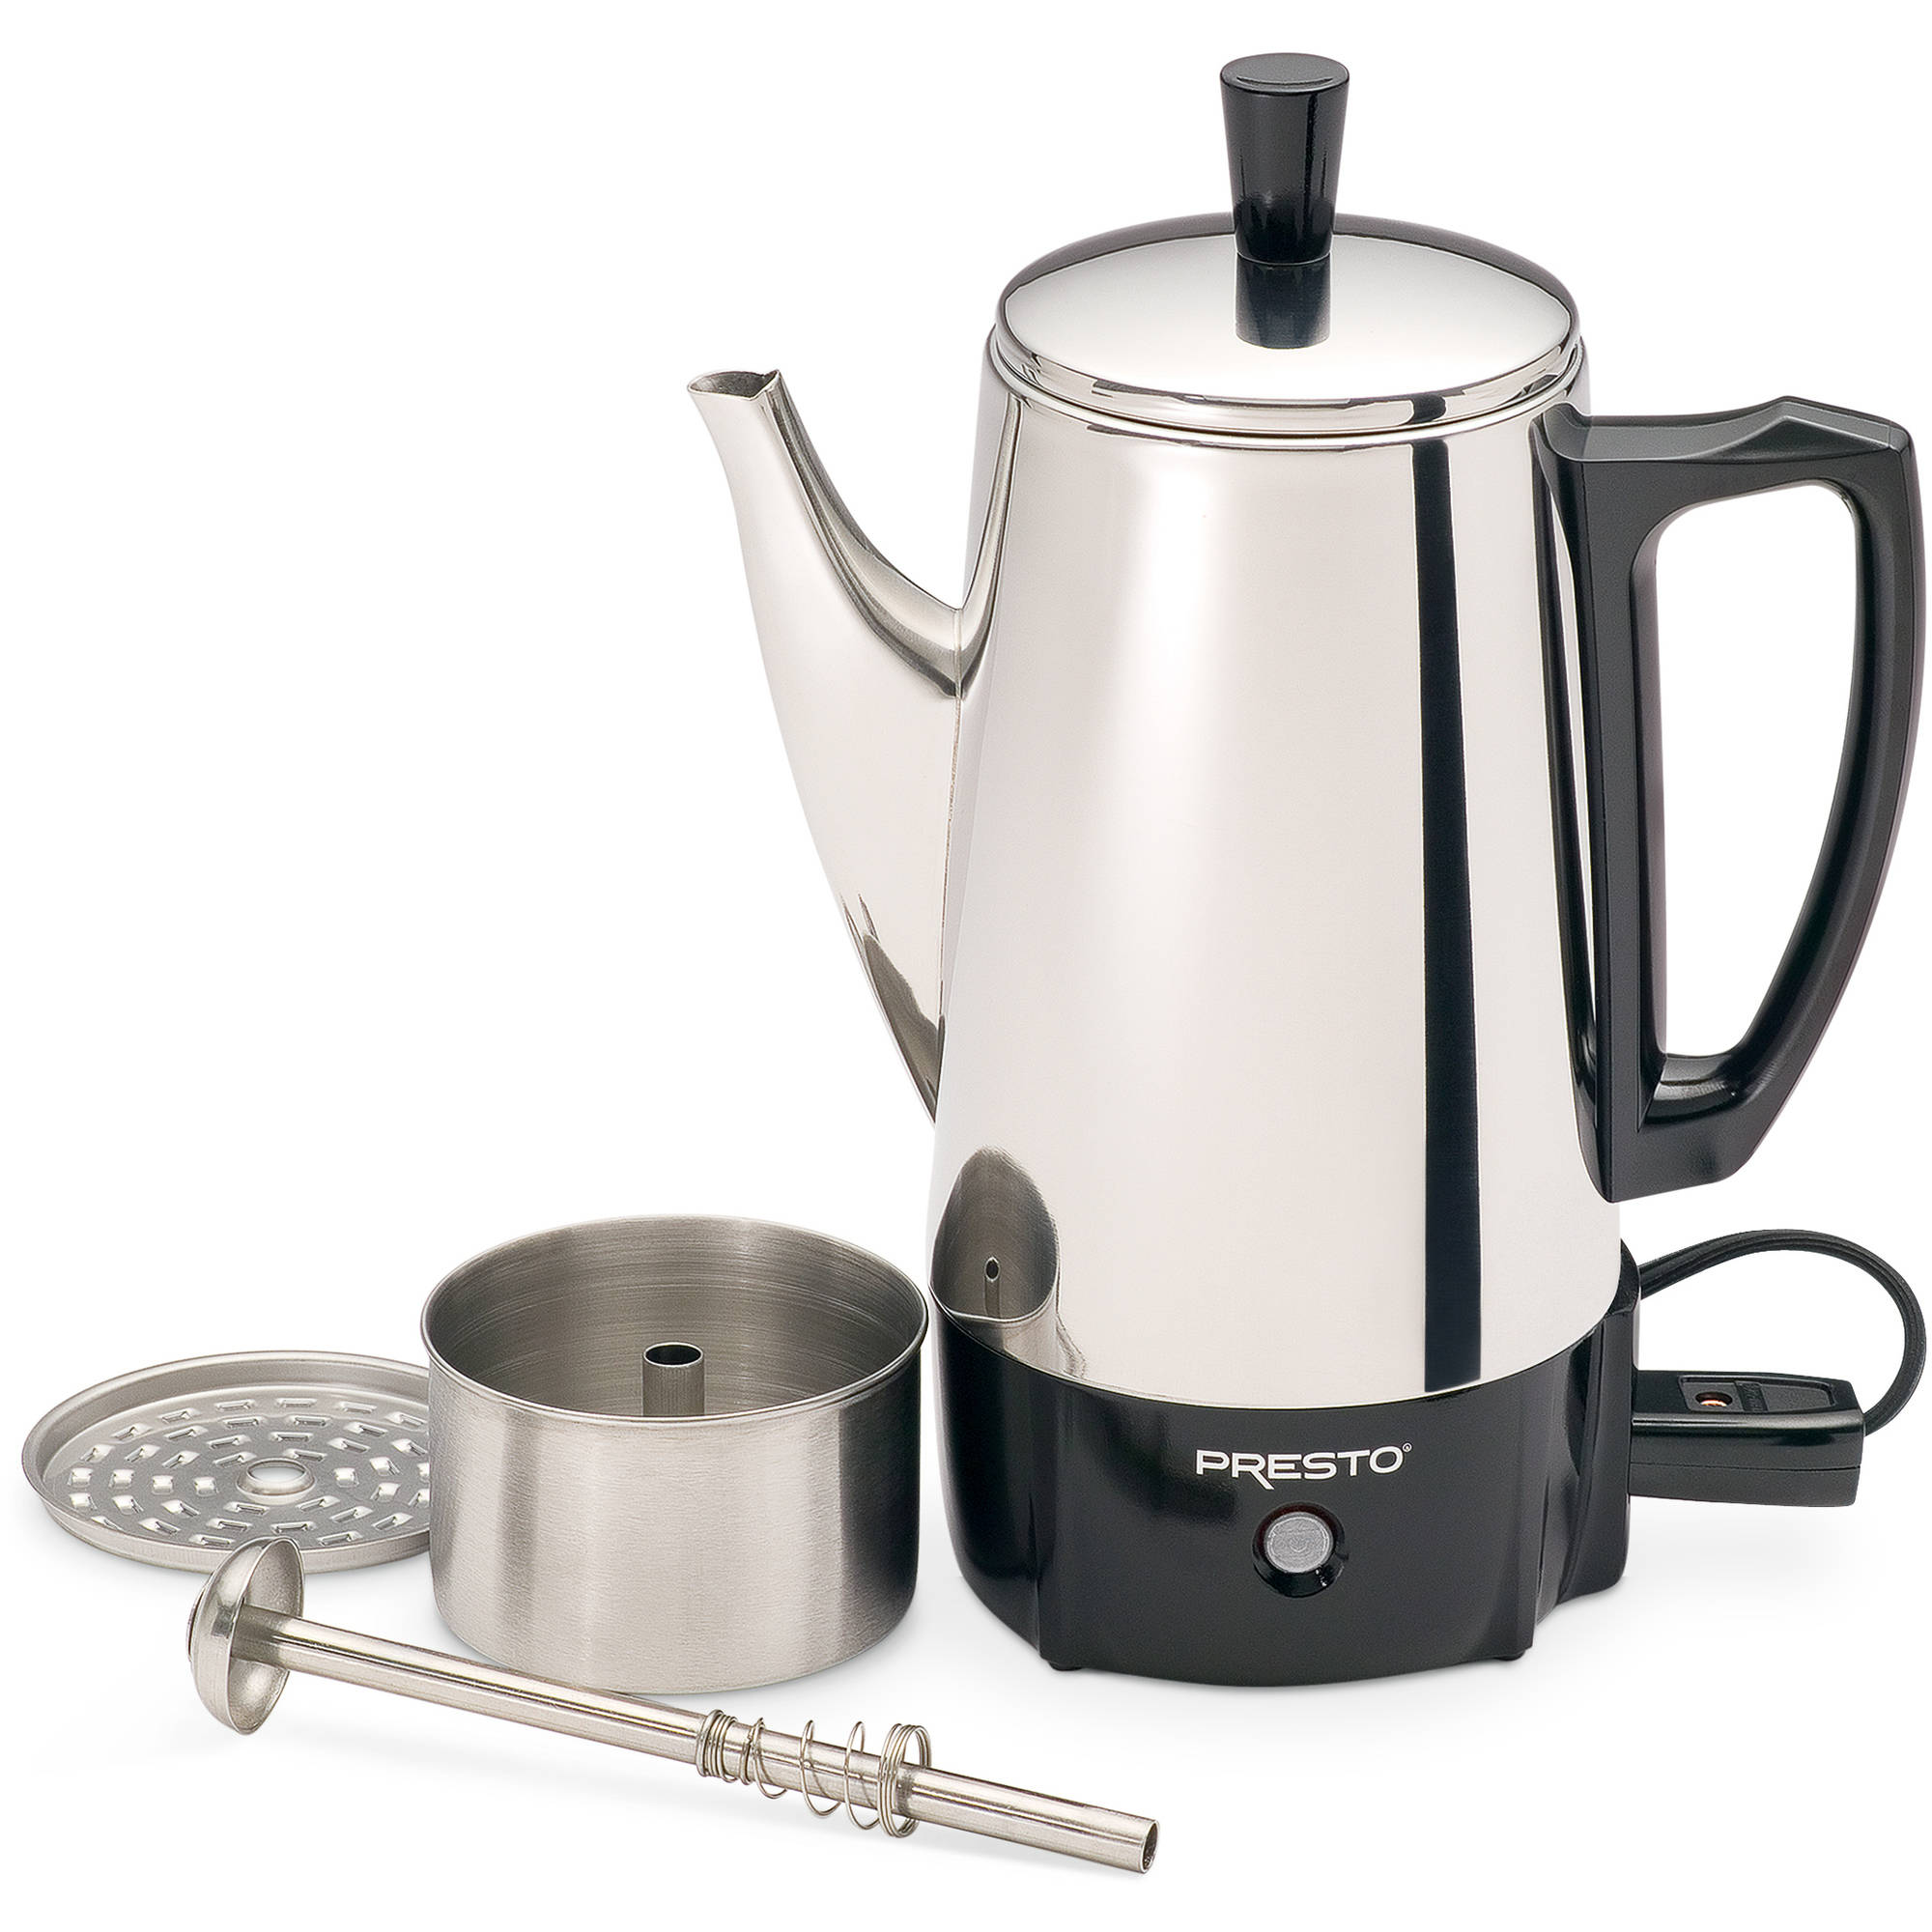 Presto® 6-Cup Capacity Stainless Steel Coffee Maker 02822 - image 3 of 10